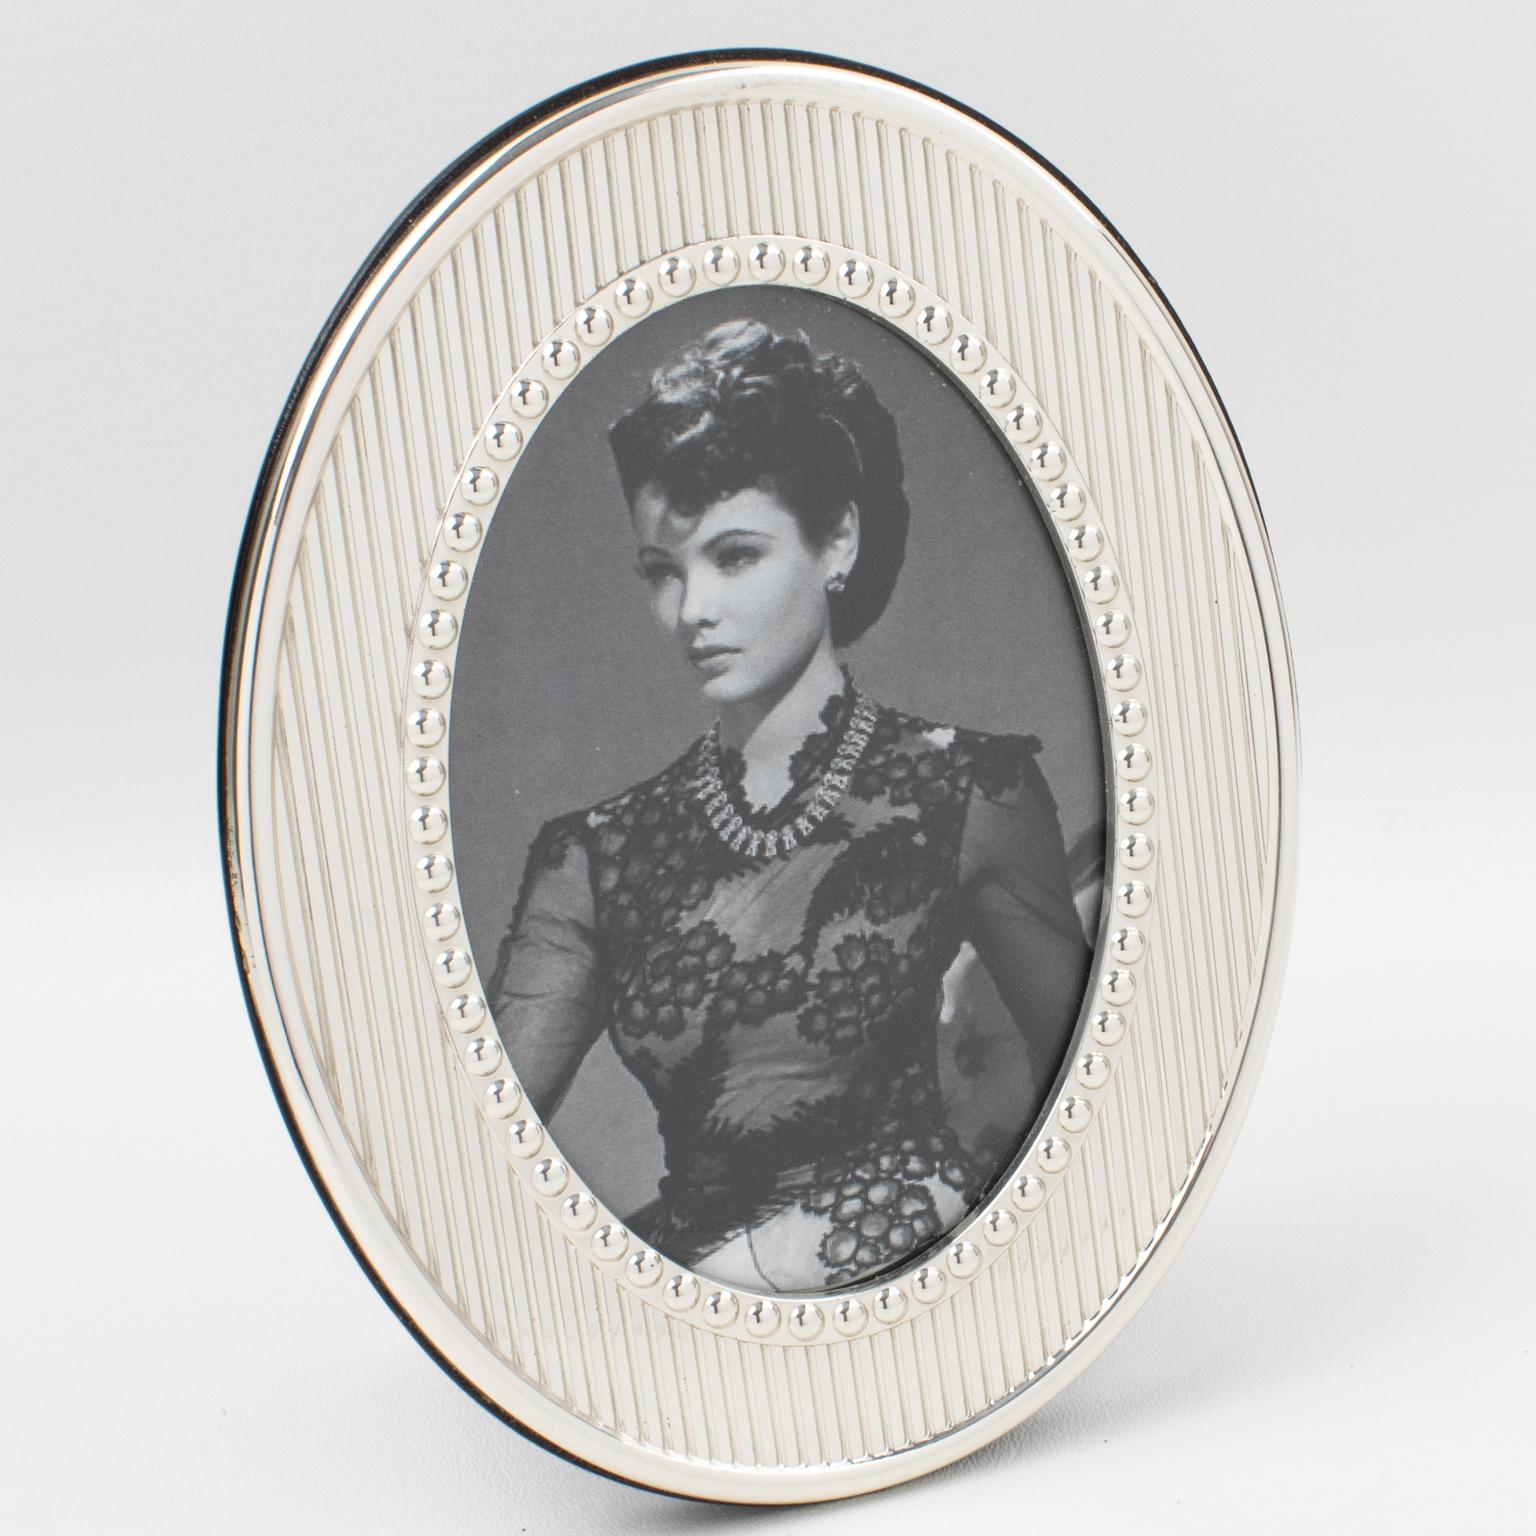 Christian Dior Paris designed this elegant sterling silver picture photo frame for its Home Collection. The oval shape has stripes and beveling patterns all around. The back and easel are in high gloss varnish dark wood. The frame is hot stamped on